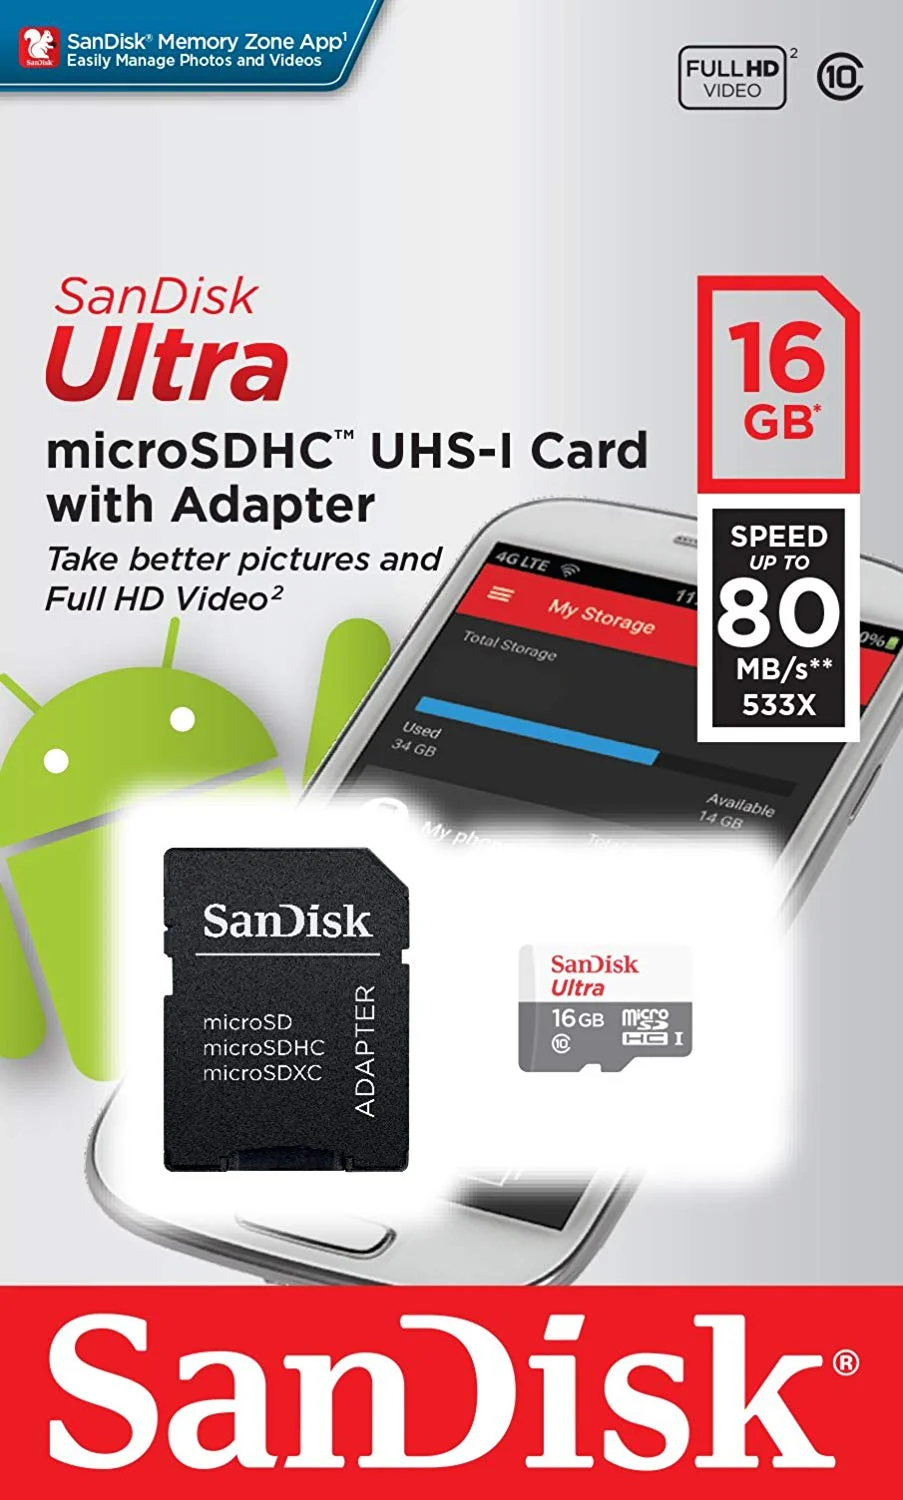 71Fdkhj30Ul. Ac Sl1500 Sandisk &Lt;Ul&Gt; &Lt;Li&Gt;&Lt;Span Class=&Quot;A-List-Item&Quot;&Gt; Bigger Capacities To Capture, Carry And Keep It All &Lt;/Span&Gt;&Lt;/Li&Gt; &Lt;Li&Gt;&Lt;Span Class=&Quot;A-List-Item&Quot;&Gt; Fast Transfer Speeds Of Up To 80Mb/S &Lt;/Span&Gt;&Lt;/Li&Gt; &Lt;Li&Gt;&Lt;Span Class=&Quot;A-List-Item&Quot;&Gt; Featuring Class 10 For Full Hd &Lt;/Span&Gt;&Lt;/Li&Gt; &Lt;Li&Gt;&Lt;Span Class=&Quot;A-List-Item&Quot;&Gt; Waterproof, X-Ray Proof, Temperature Proof, And Shockproof. &Lt;/Span&Gt;&Lt;/Li&Gt; &Lt;Li&Gt;&Lt;Span Class=&Quot;A-List-Item&Quot;&Gt; Sd Adapter Included For Compatibility With Digital Cameras&Lt;/Span&Gt;&Lt;/Li&Gt; &Lt;/Ul&Gt; &Lt;Strong&Gt;7 Years Manufacturer Limited Warranty&Lt;/Strong&Gt; Sandisk Class 10 Sandisk Class 10 Ultra Android Microsdhc Memory Card And Sd Adapter (64 Gb)